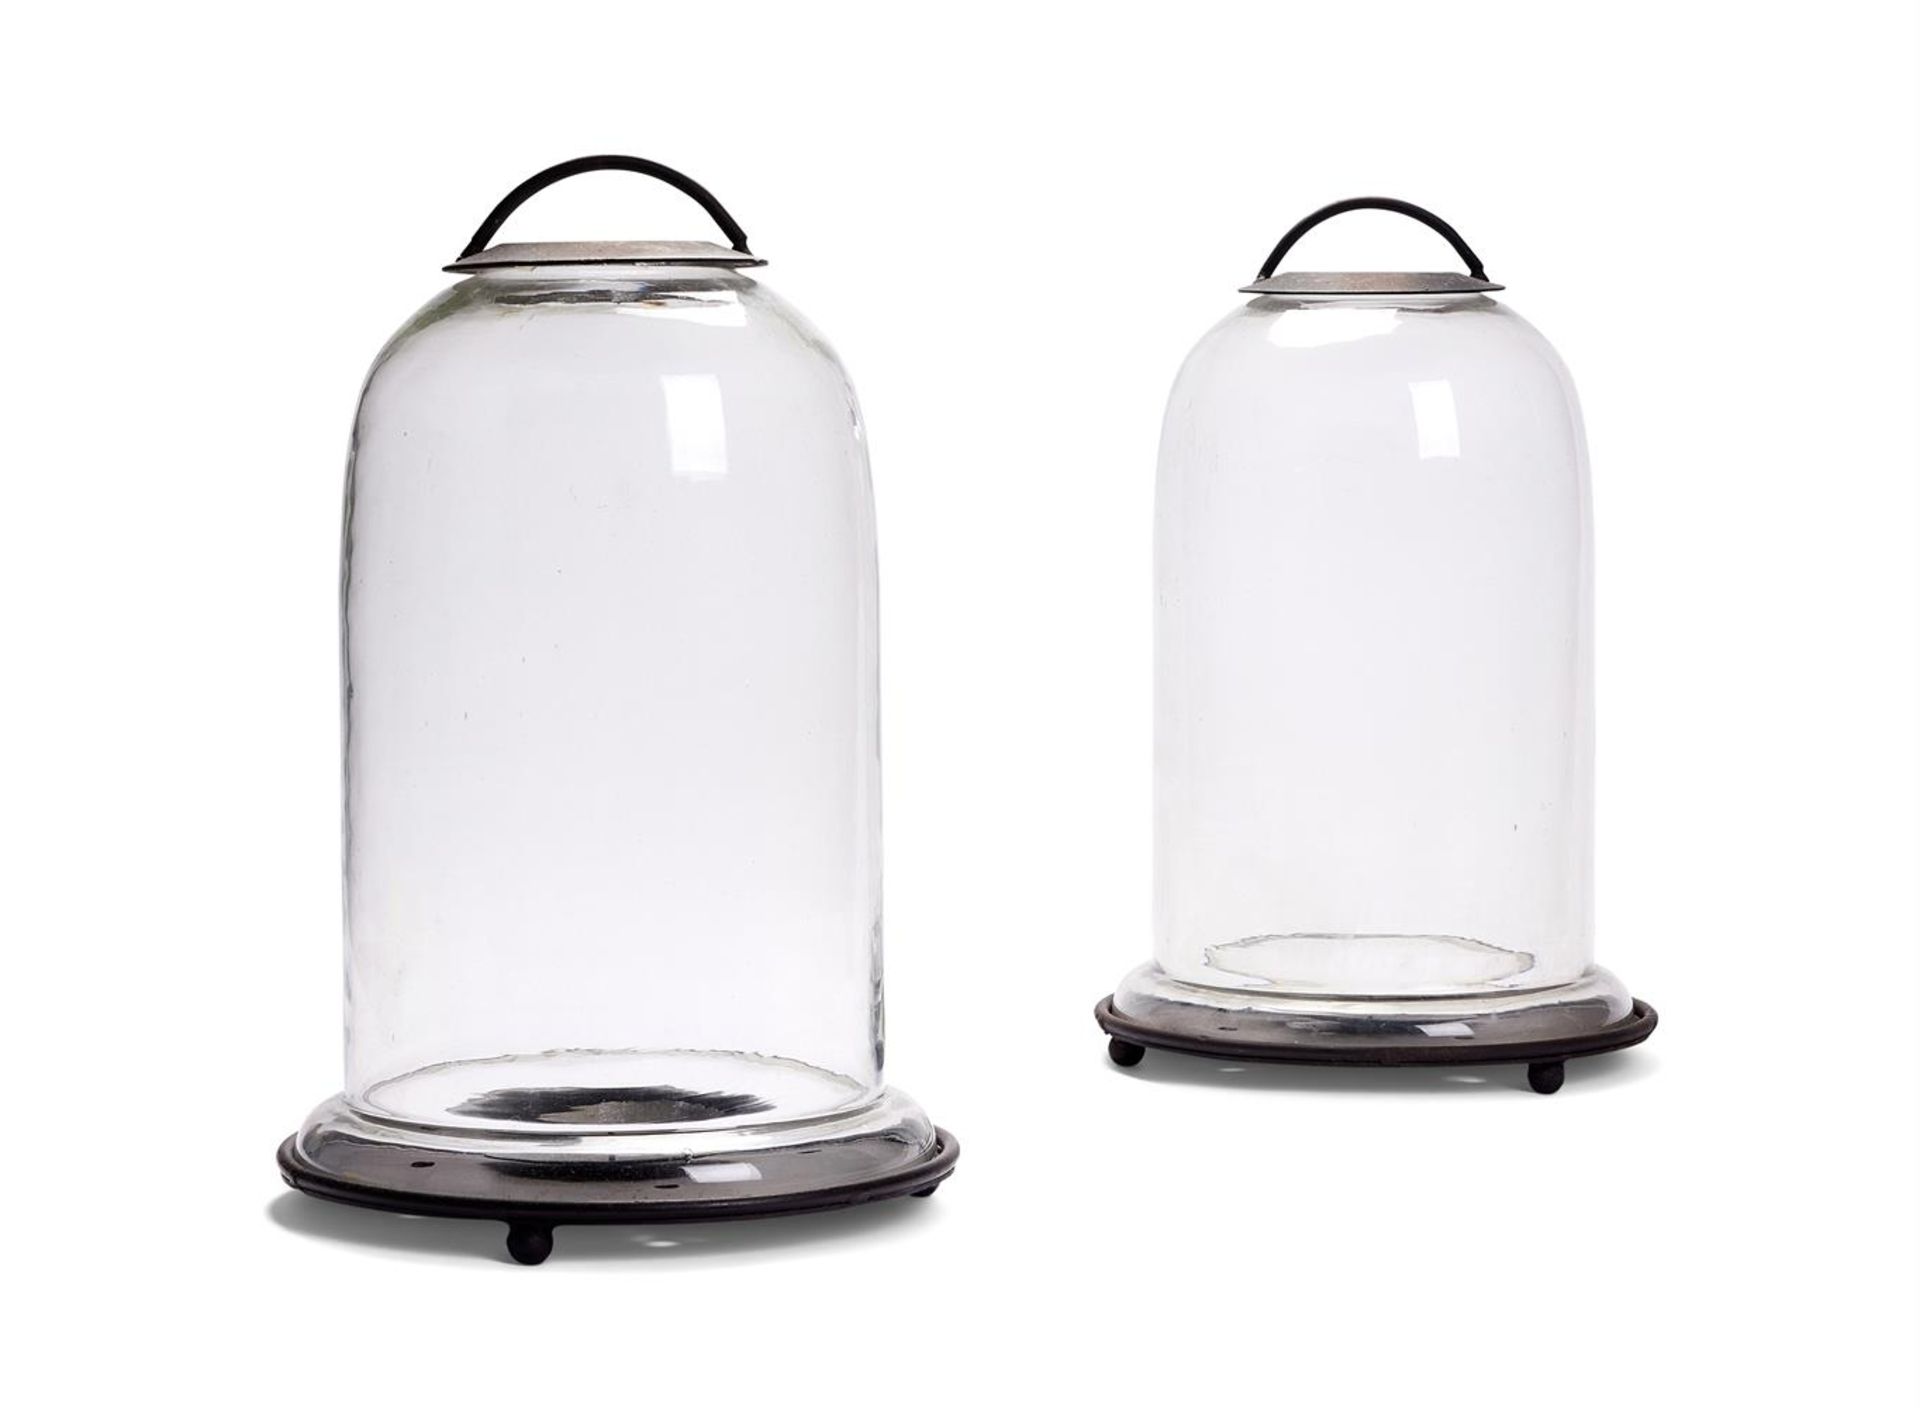 A PAIR OF GLASS AND PATINATED METAL BELL JAR STORM LANTERNS, MODERN